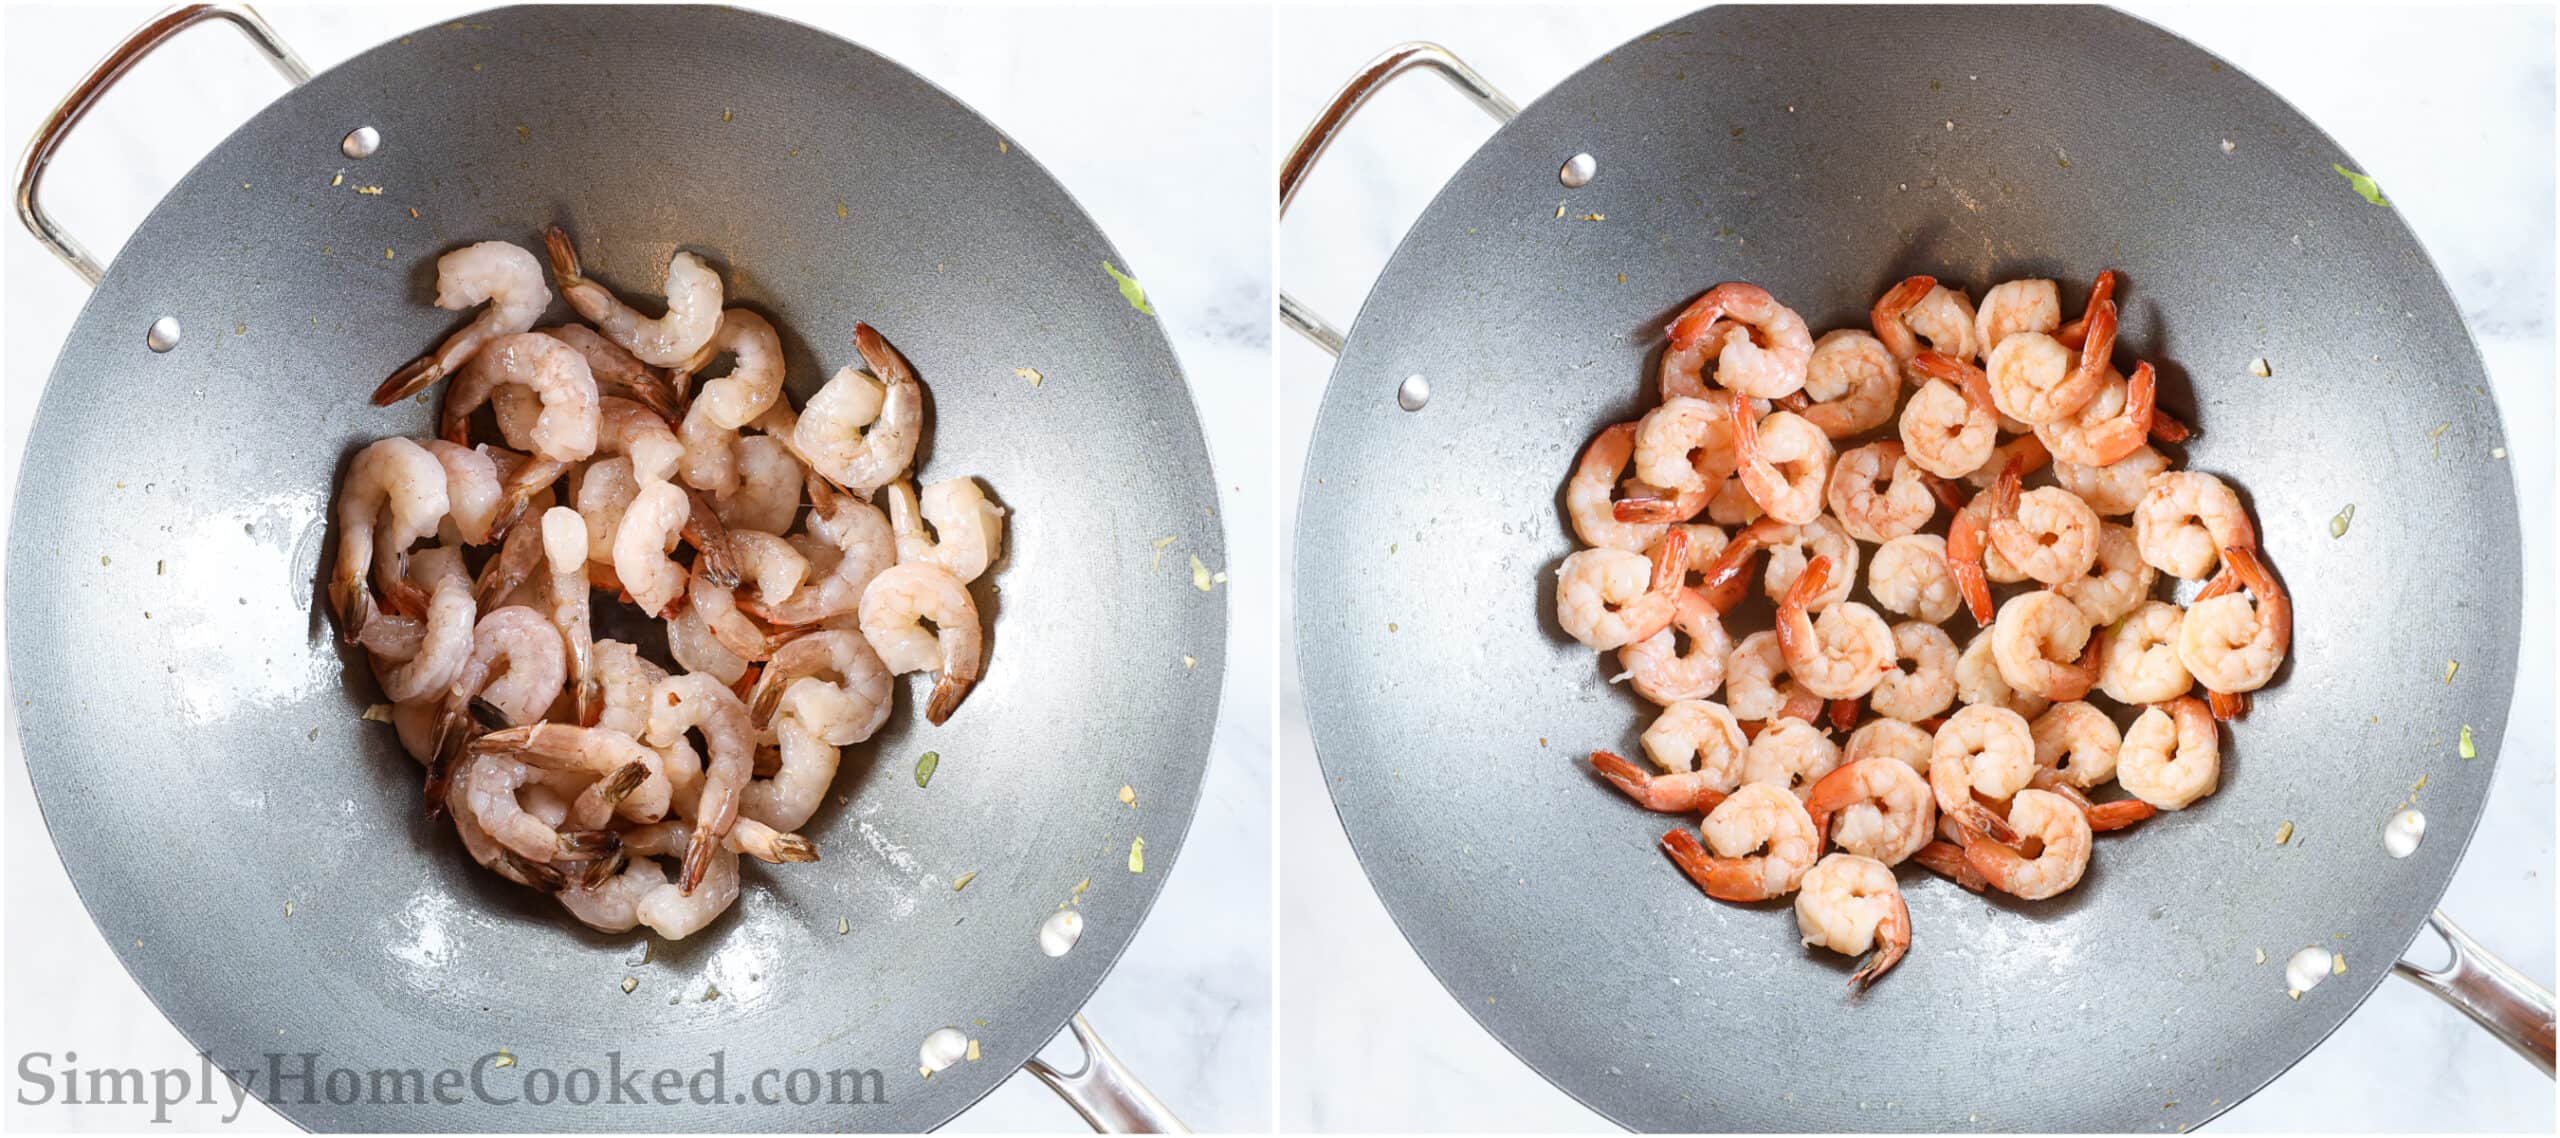 Steps to make 30-Minute Shrimp Chow Mein, including cooking the shrimp in a wok until they are pink and opaque.